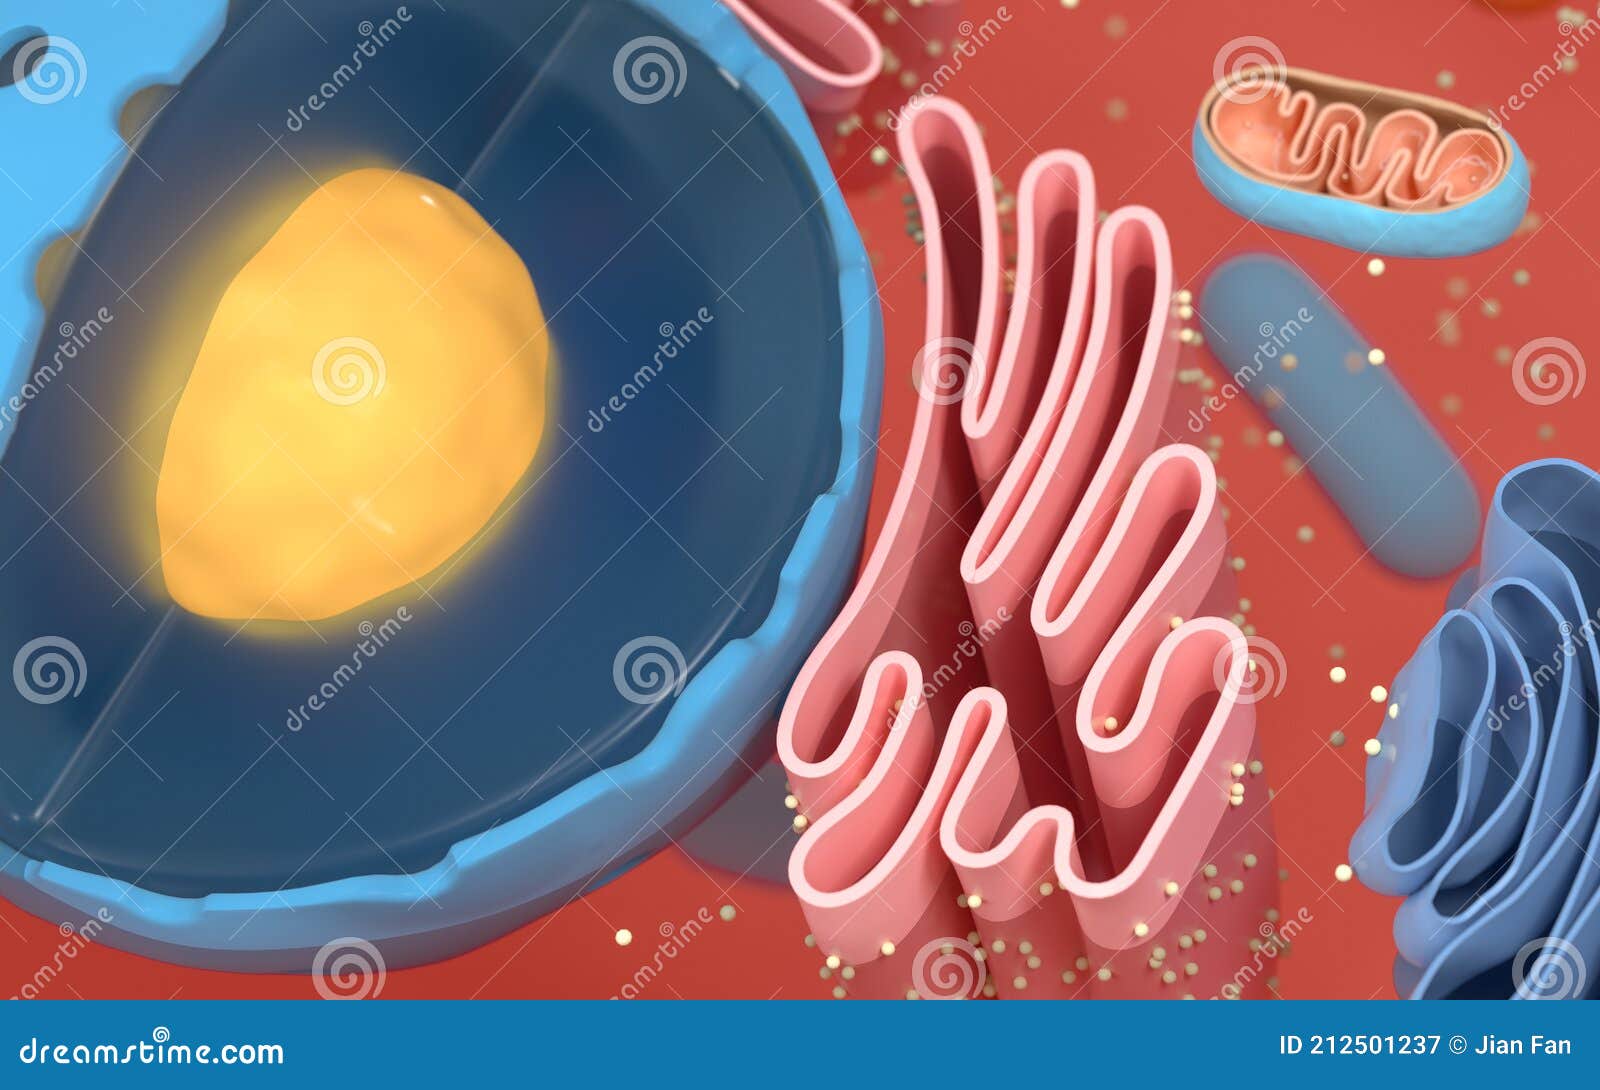 internal structure of an animal cell, 3d rendering. section view